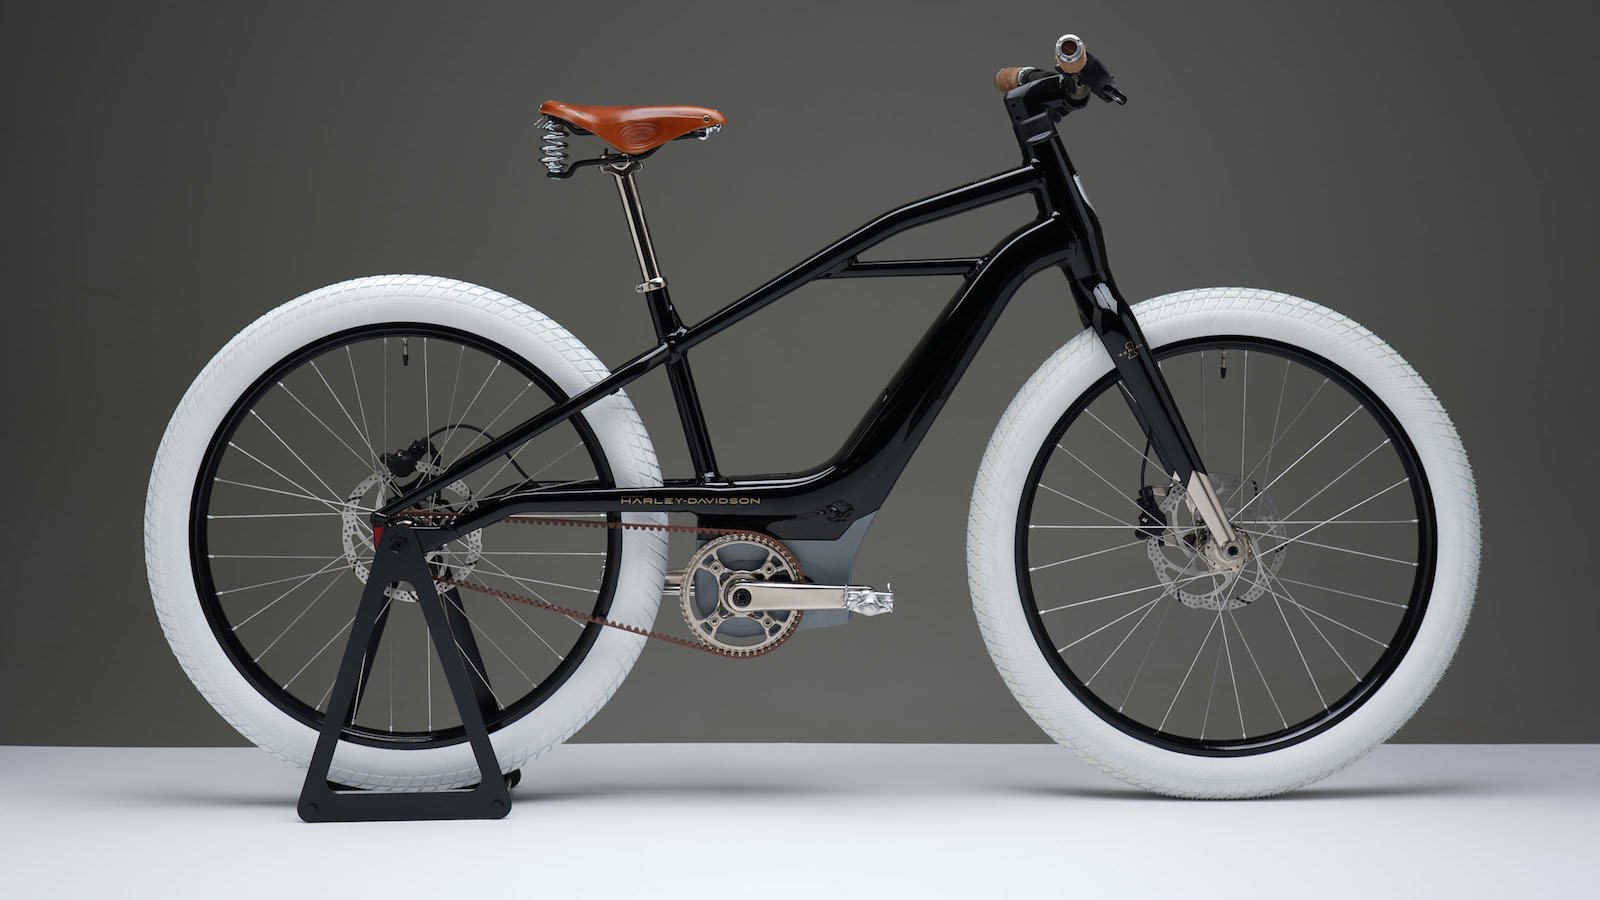 Harley-Davidson Serial 1 electric bike is designed similar to the brand’s first motorcycle